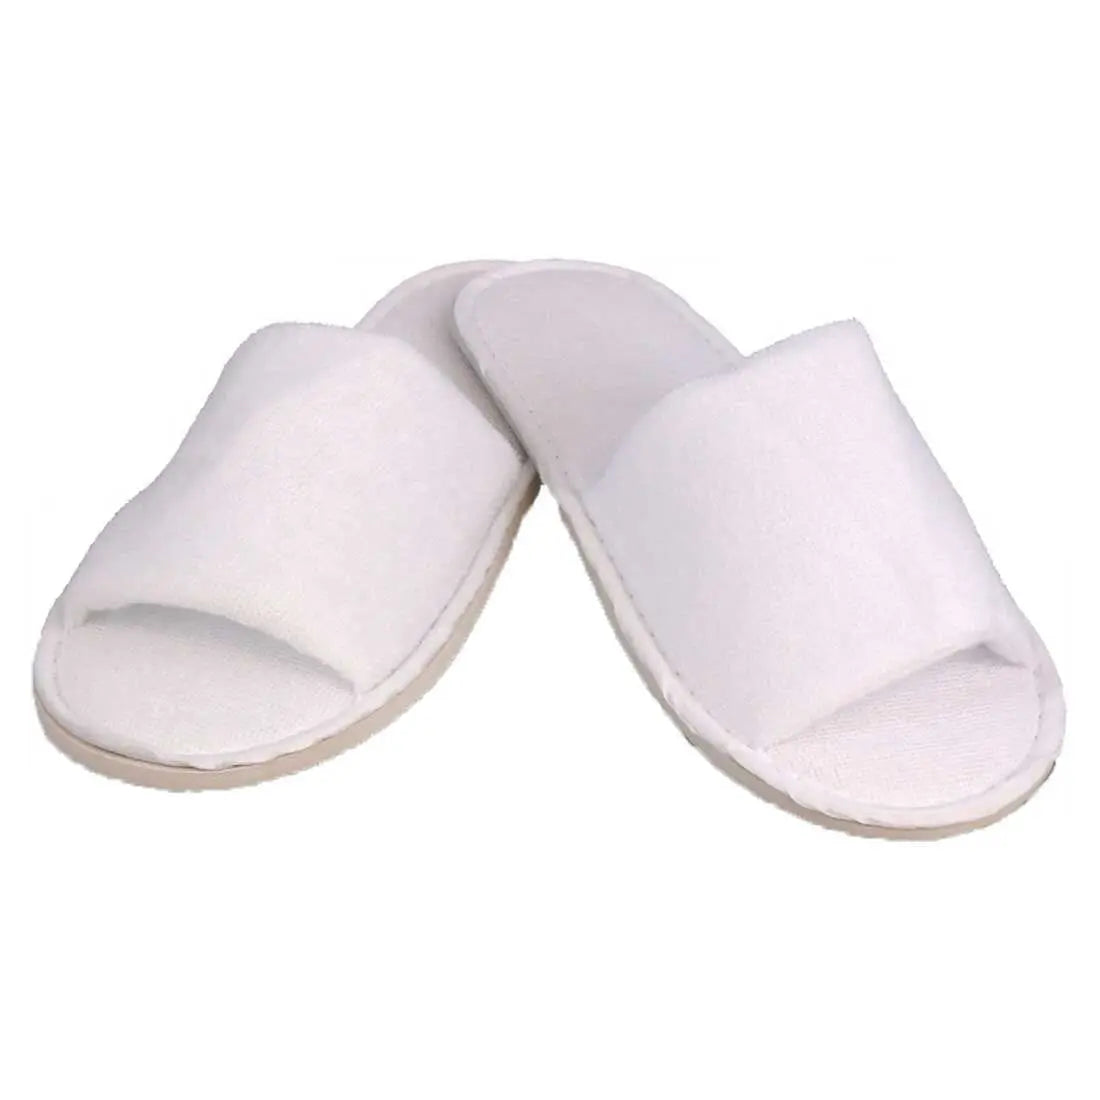 Disposable Slippers With Rubber Sole - Open Toe   